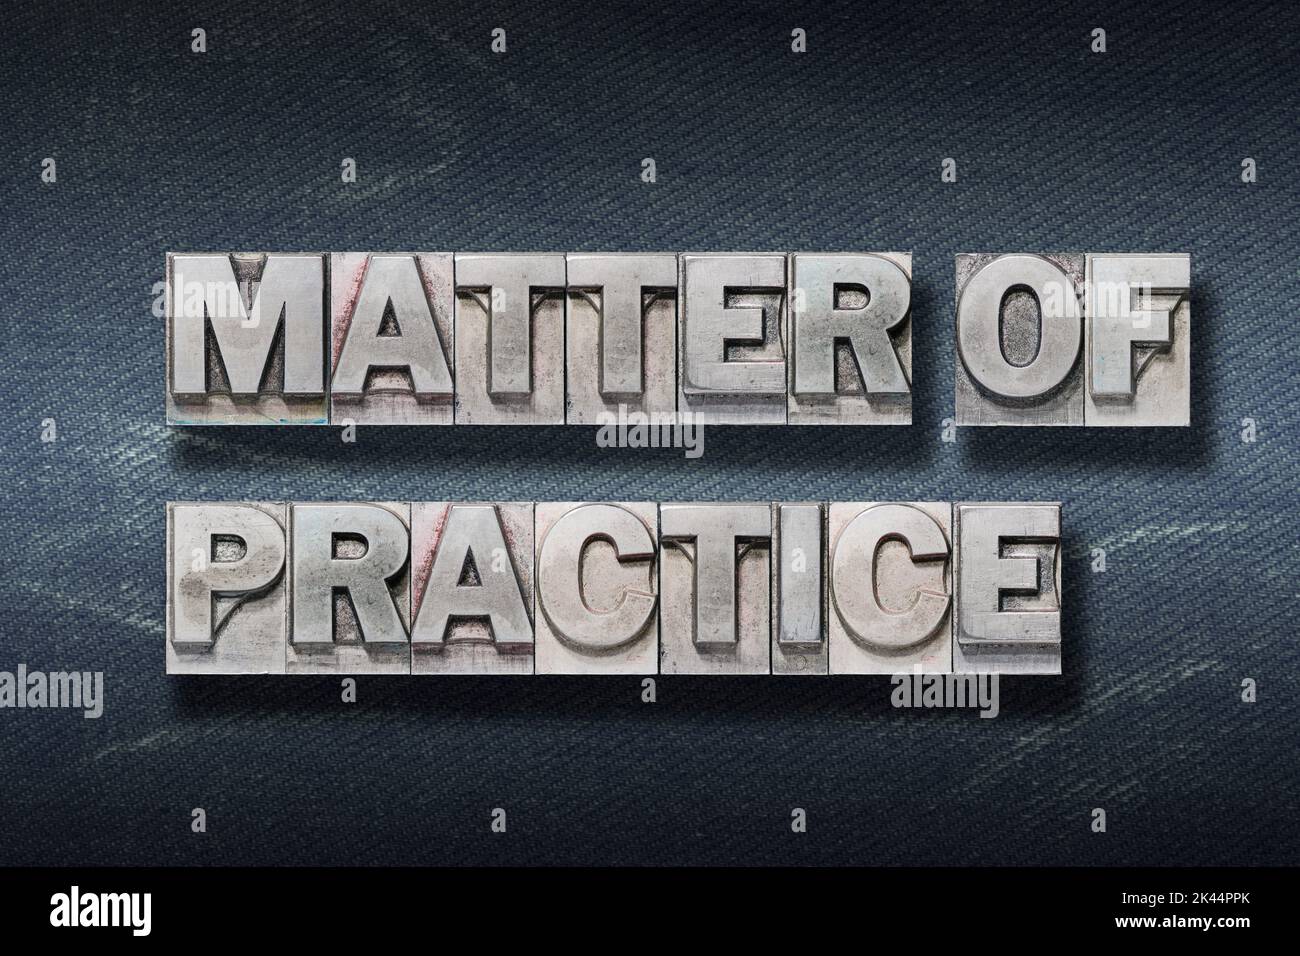 matter of practice phrase made from metallic letterpress on dark jeans background Stock Photo